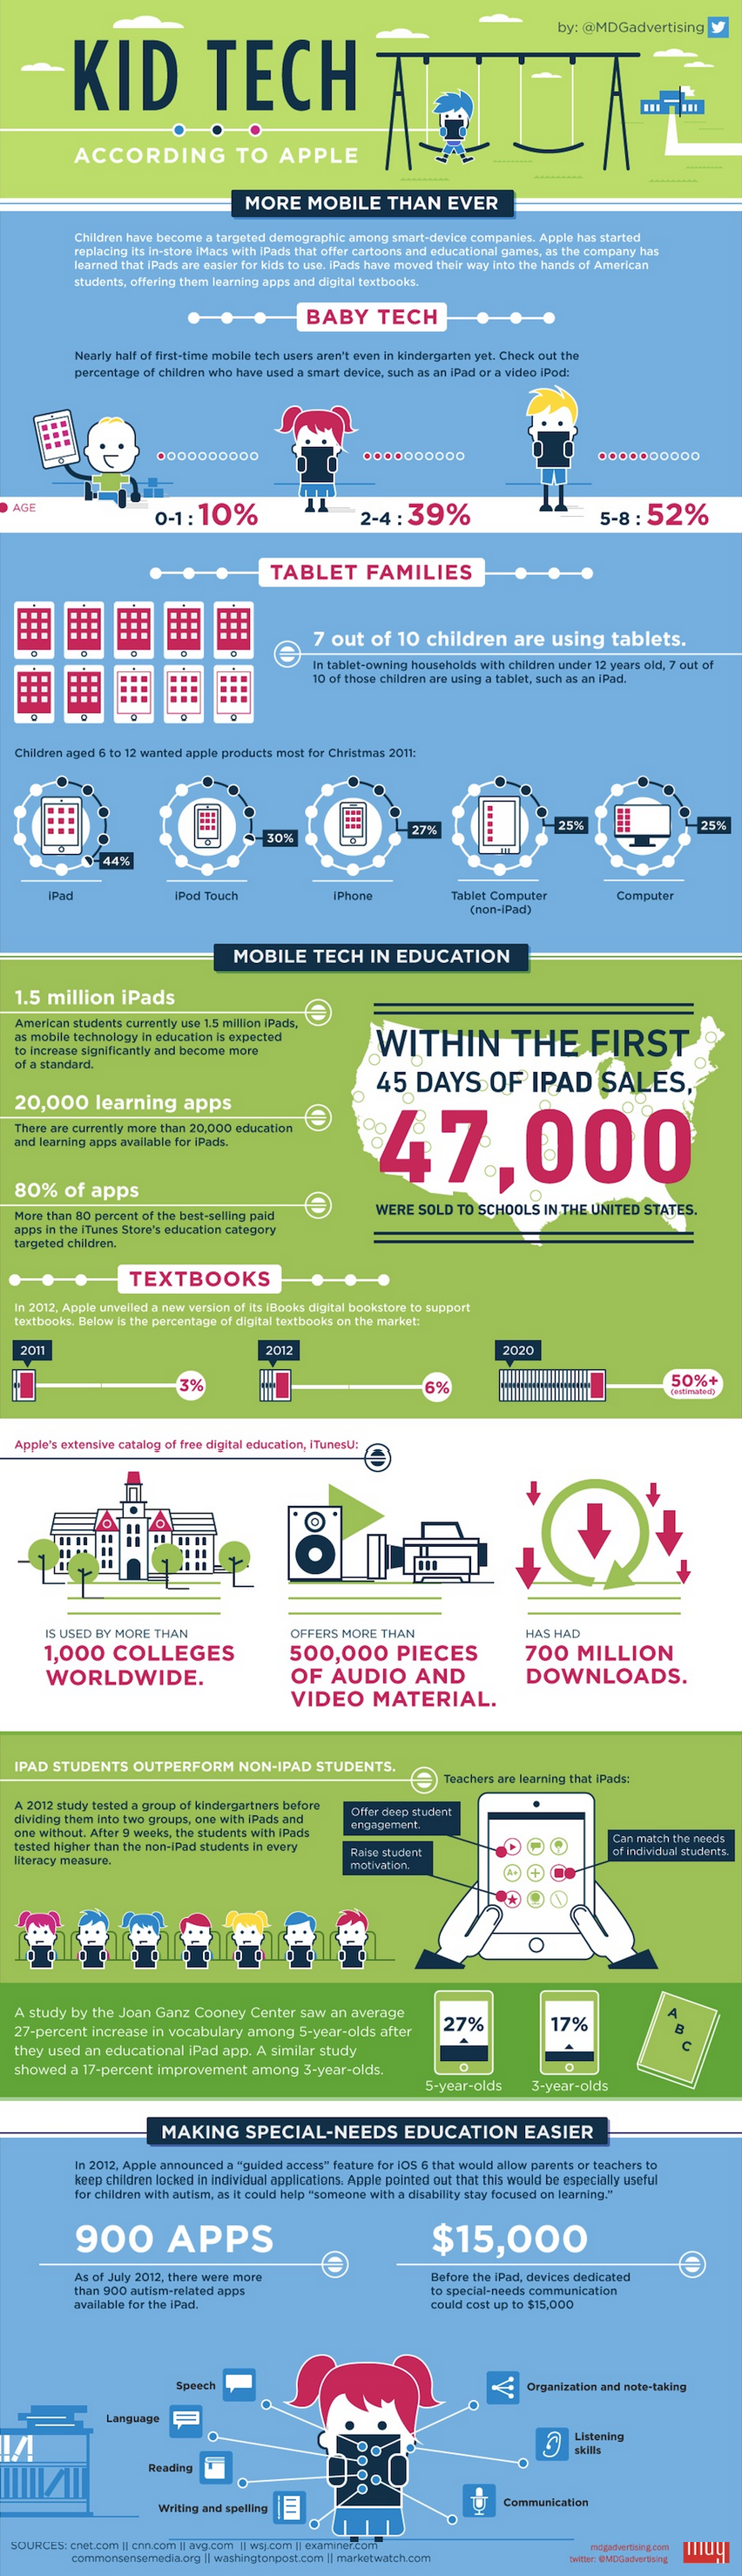 Kids and Tablet Research Infographic